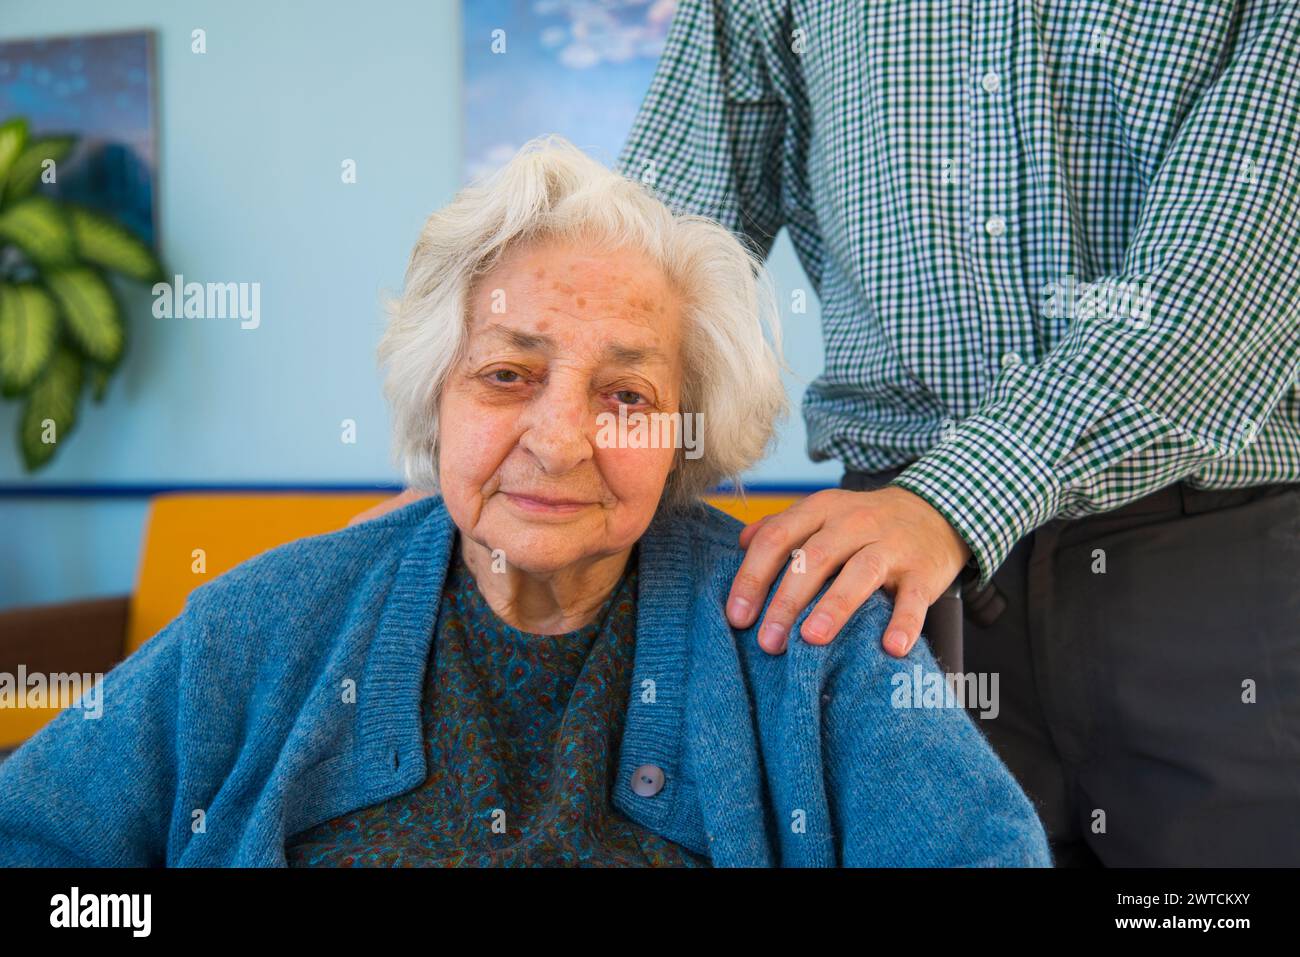 Portrait of old woman in a nursing home and a man putting his hand on her shoulder. Stock Photo